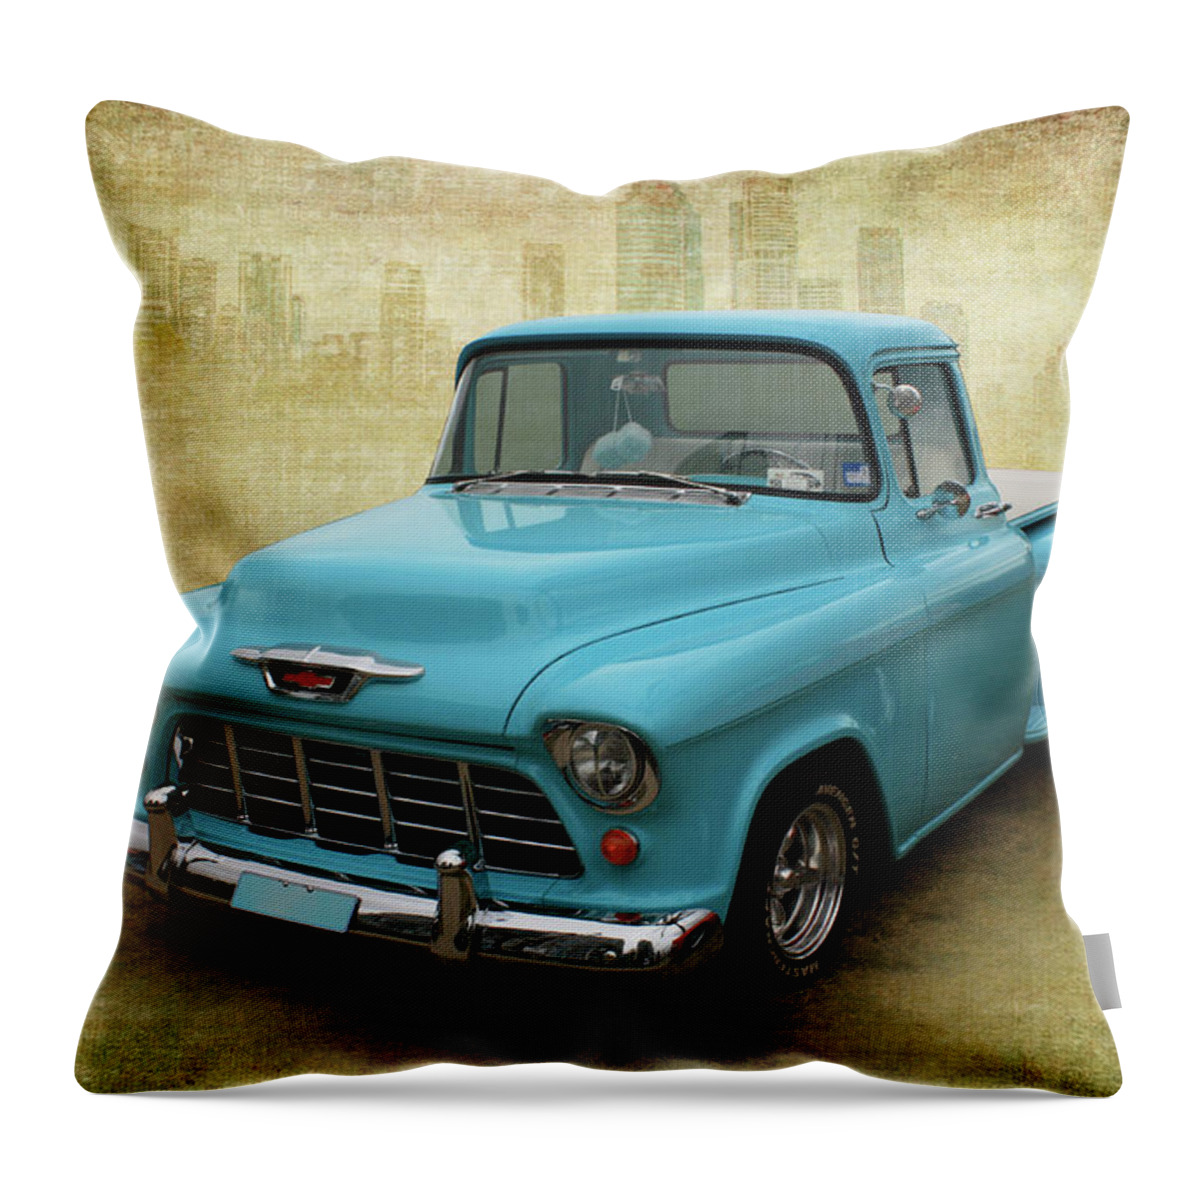 Truck Throw Pillow featuring the photograph 55 Stepside by Keith Hawley